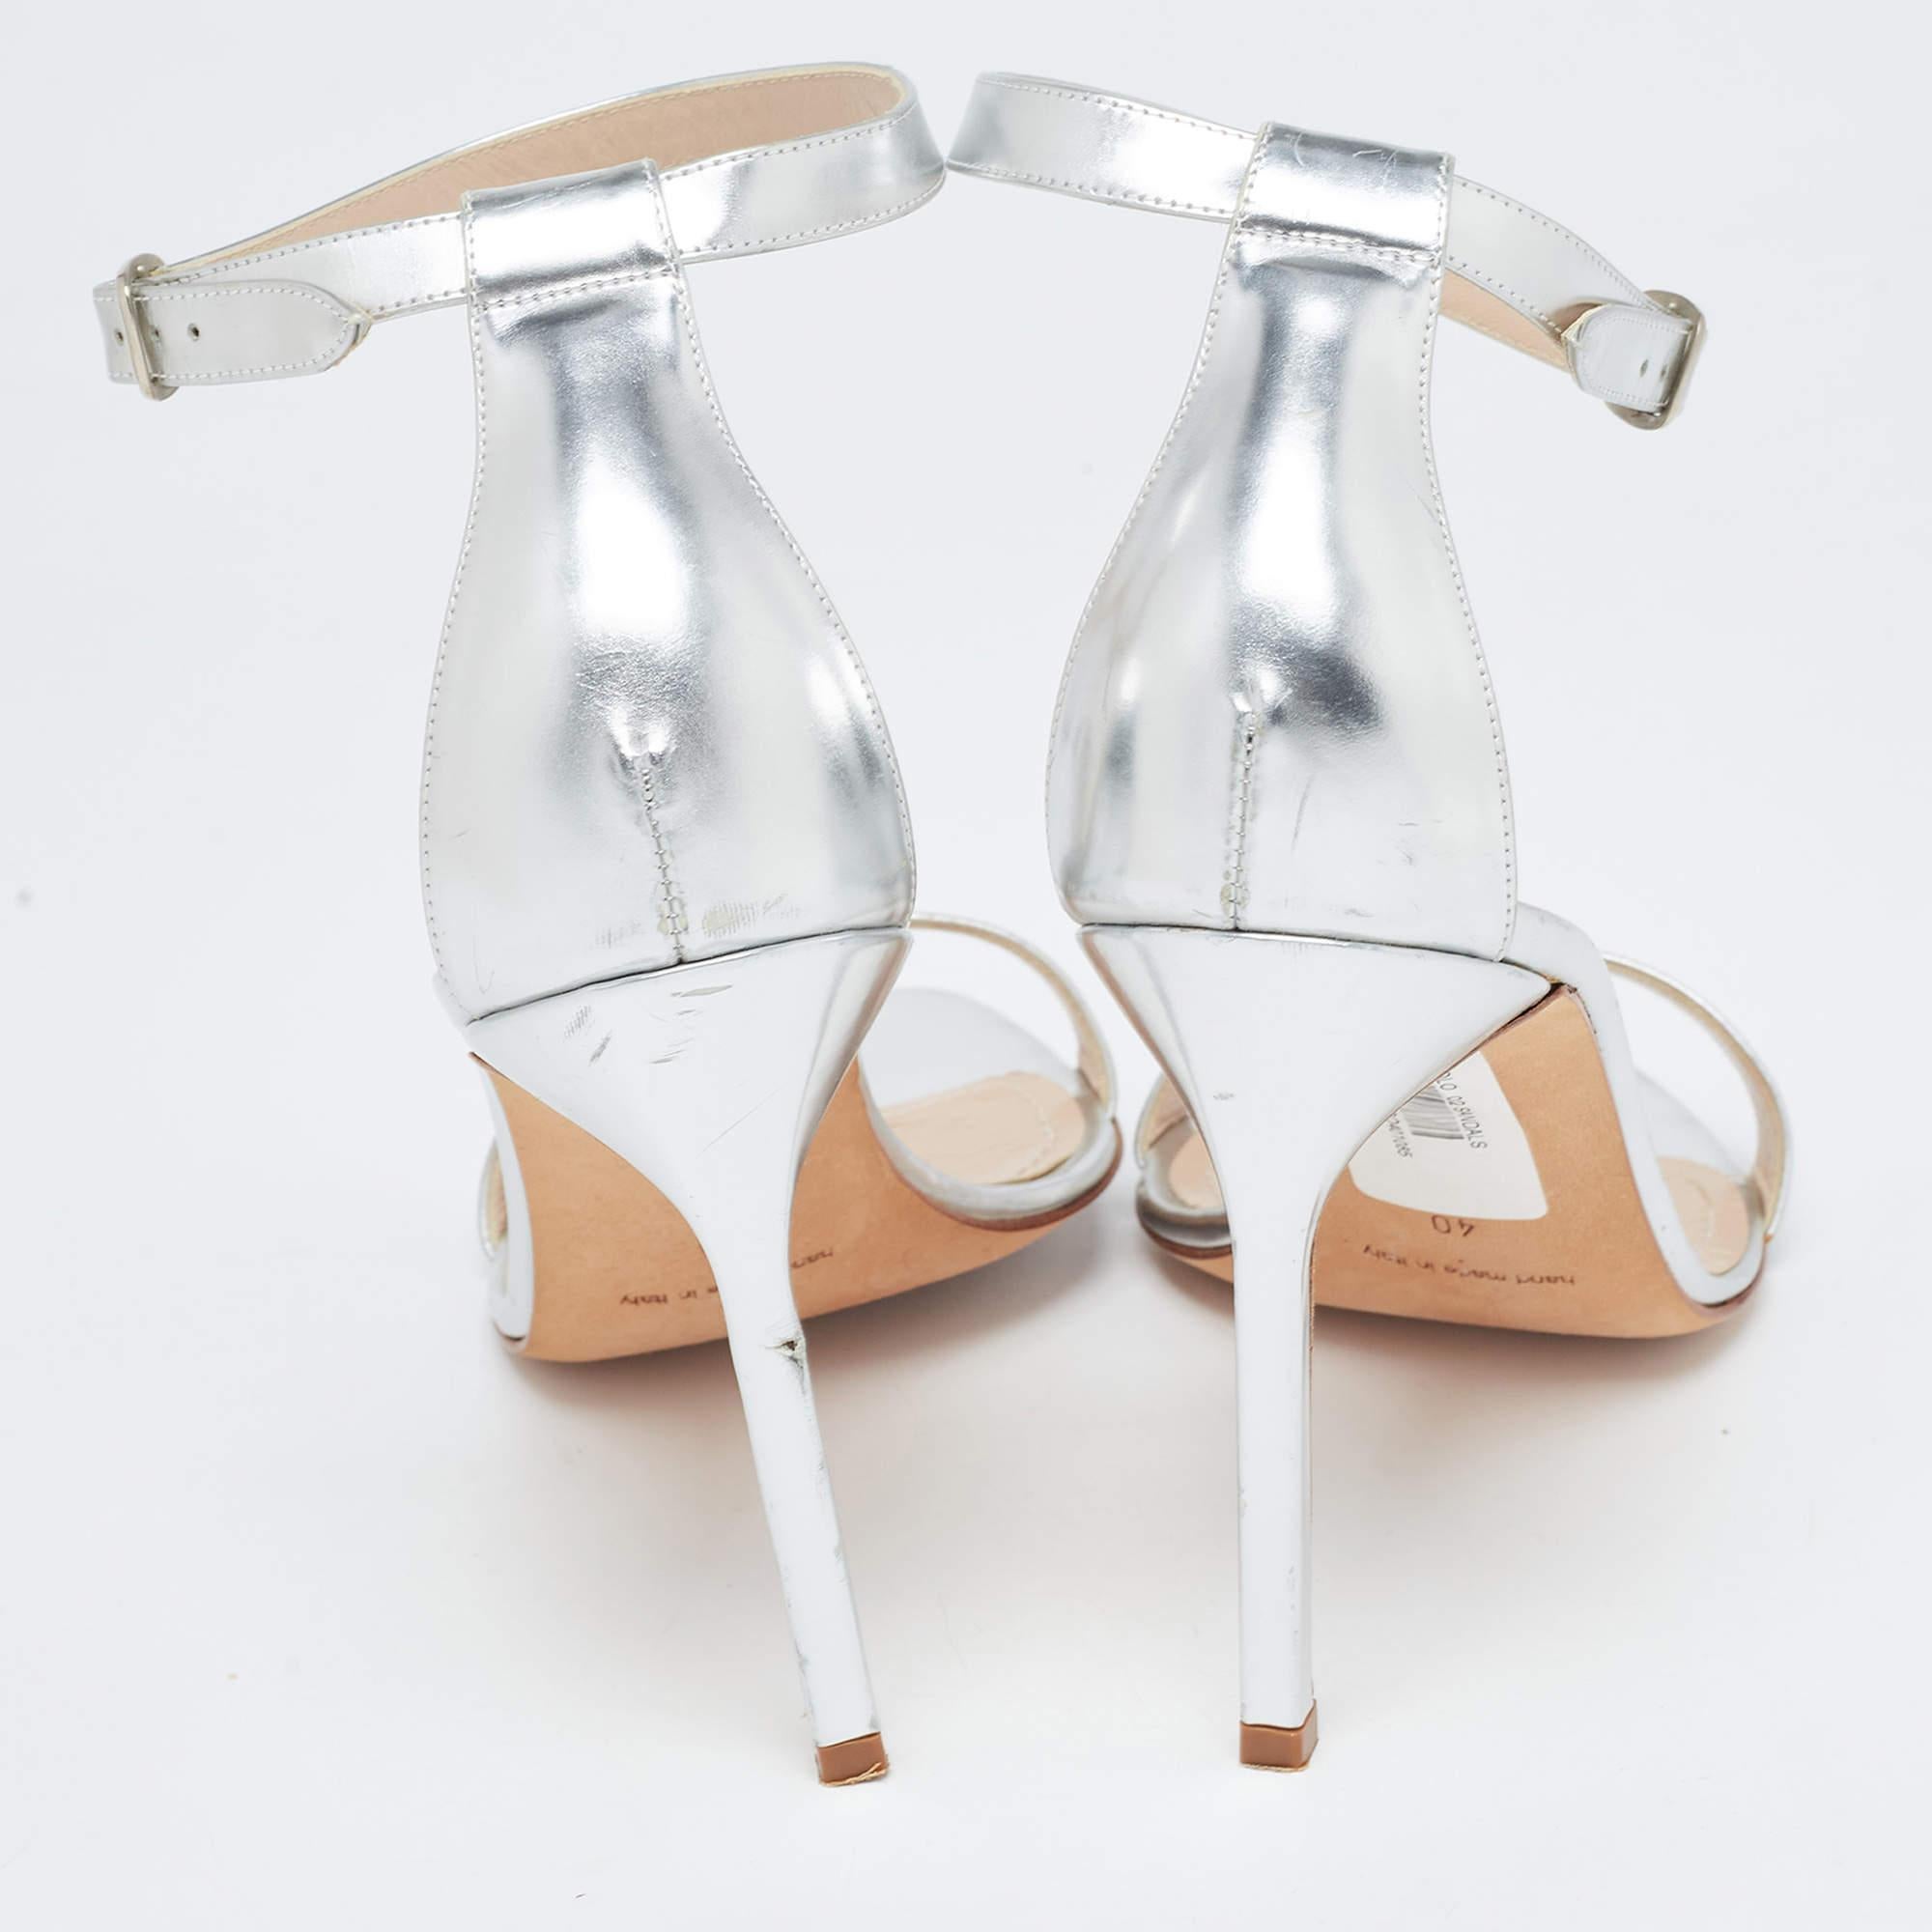 Elevate your ensemble with these designer heels for women. Meticulously crafted, these exquisite heels combine luxury and comfort, creating a statement pair that's both fashionable and fabulous for every occasion.

